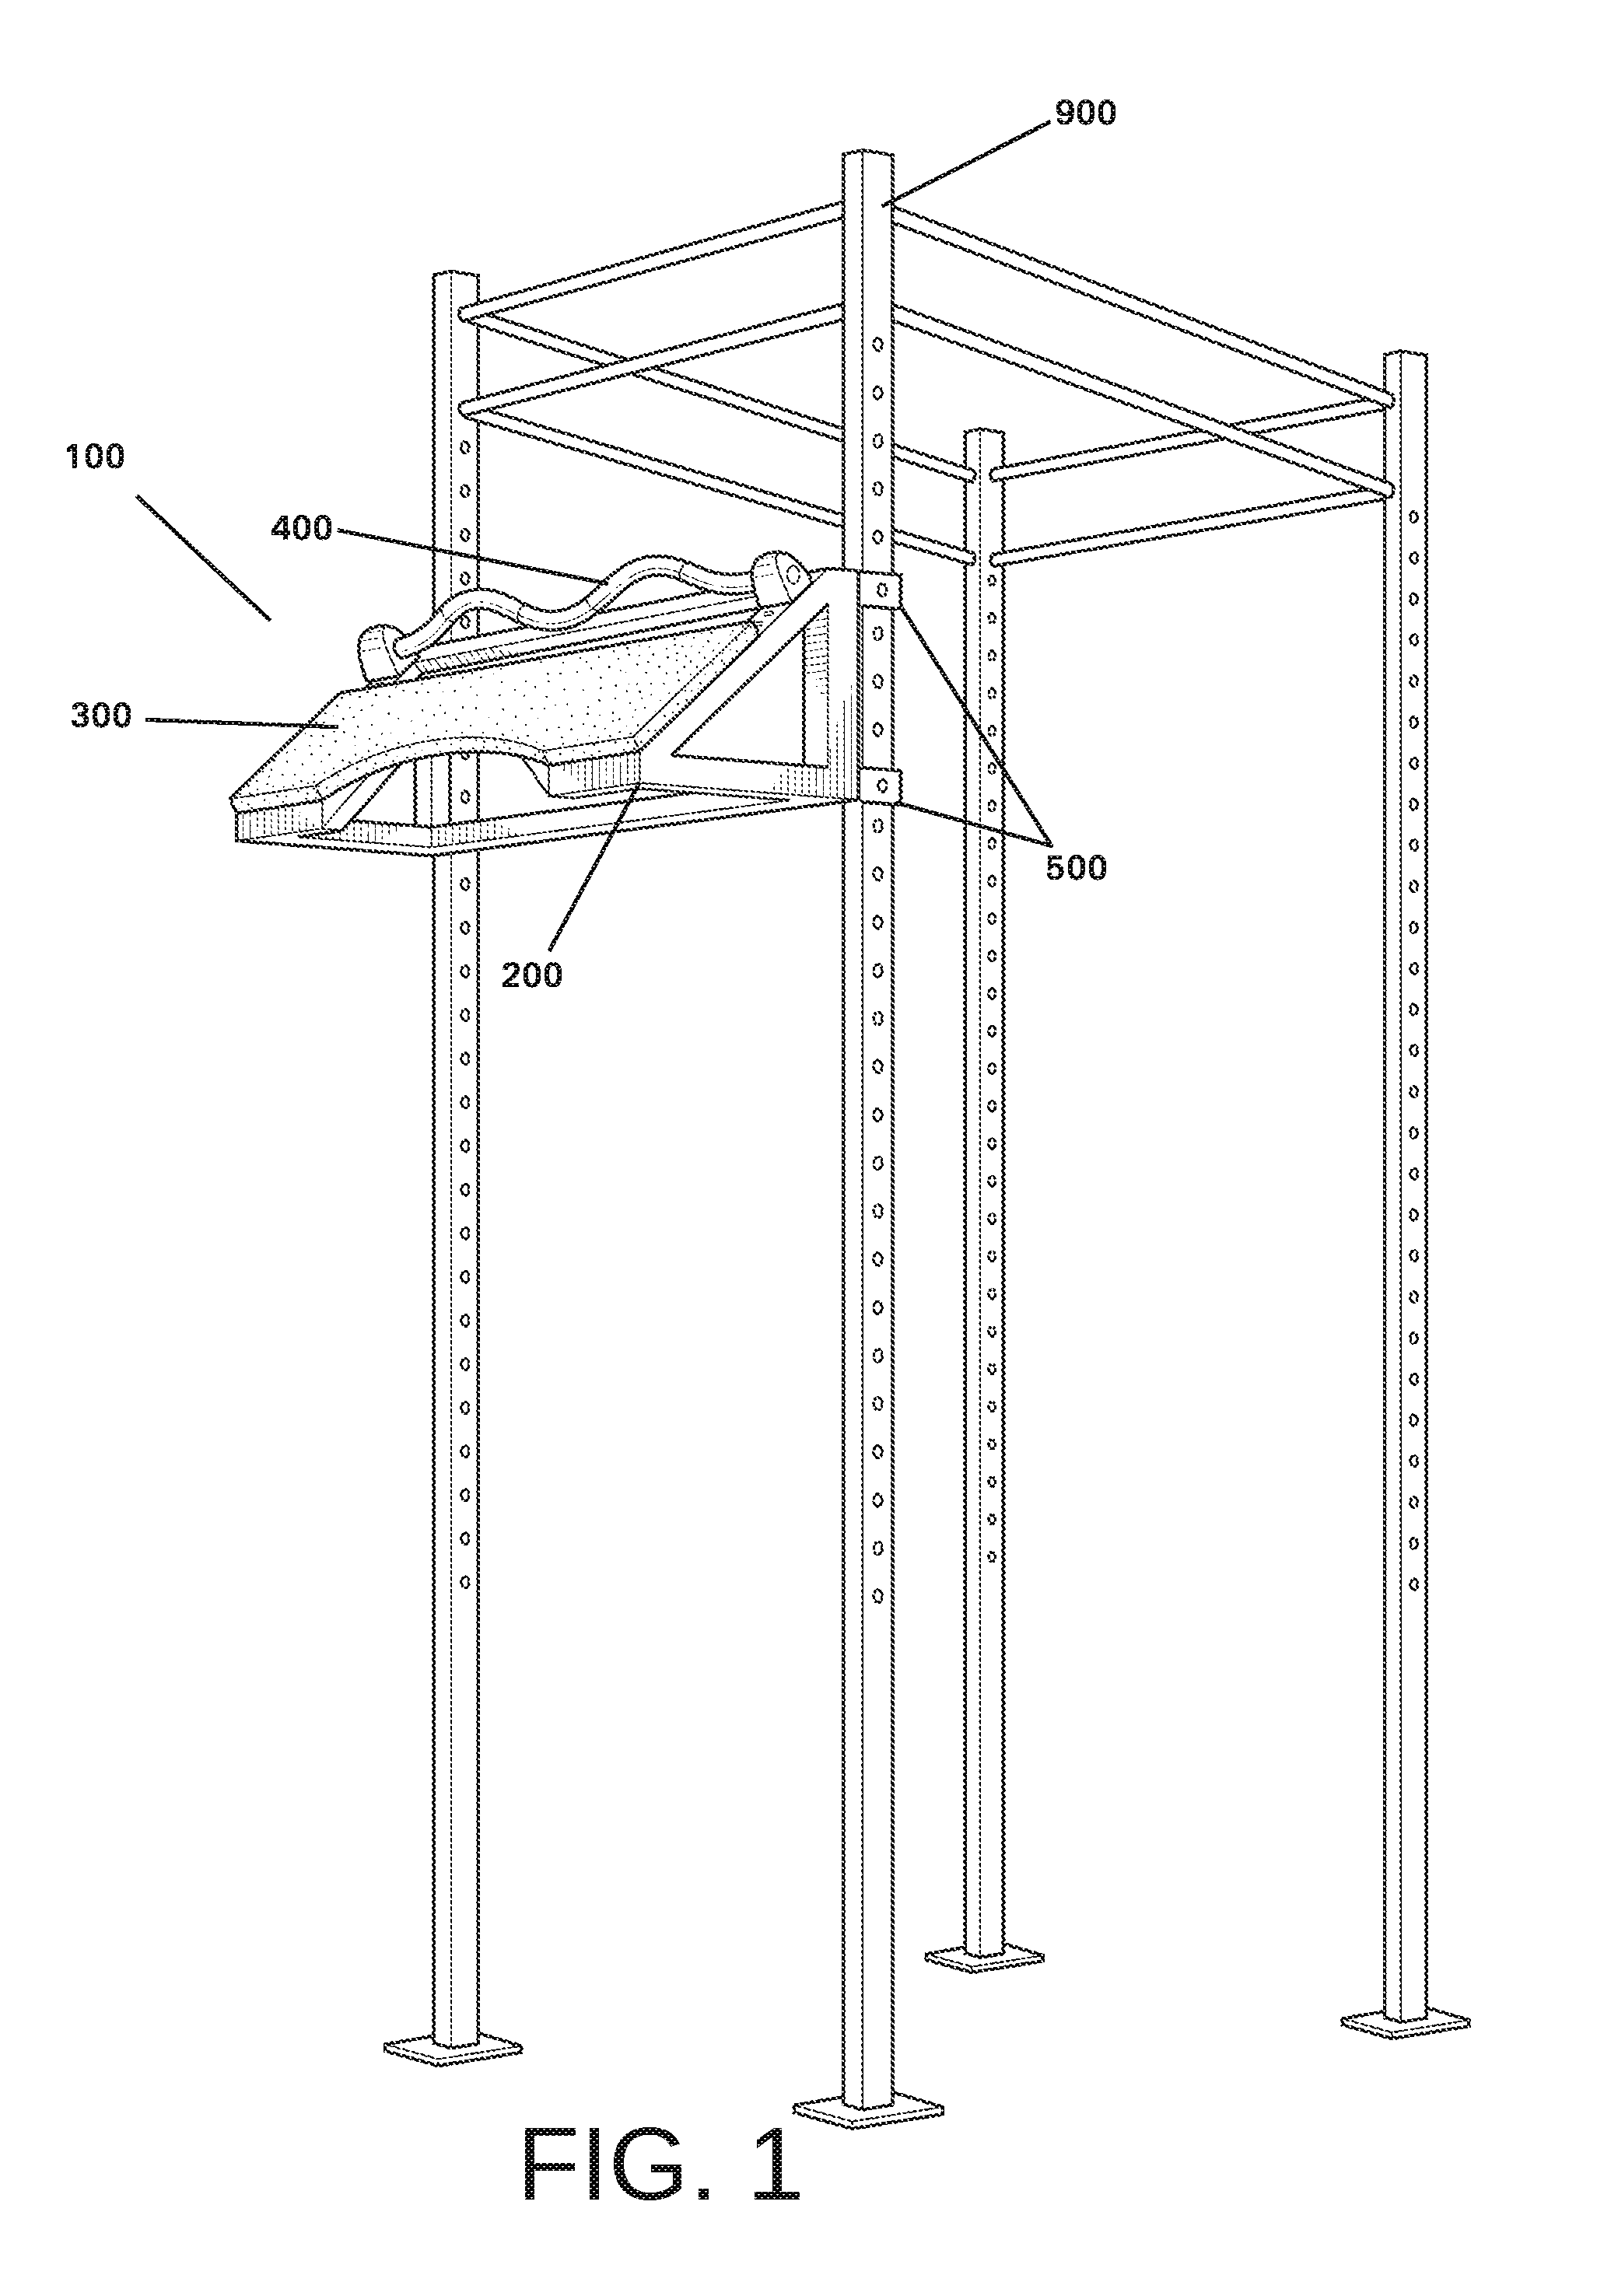 Isolated Upper-body Exercise Device